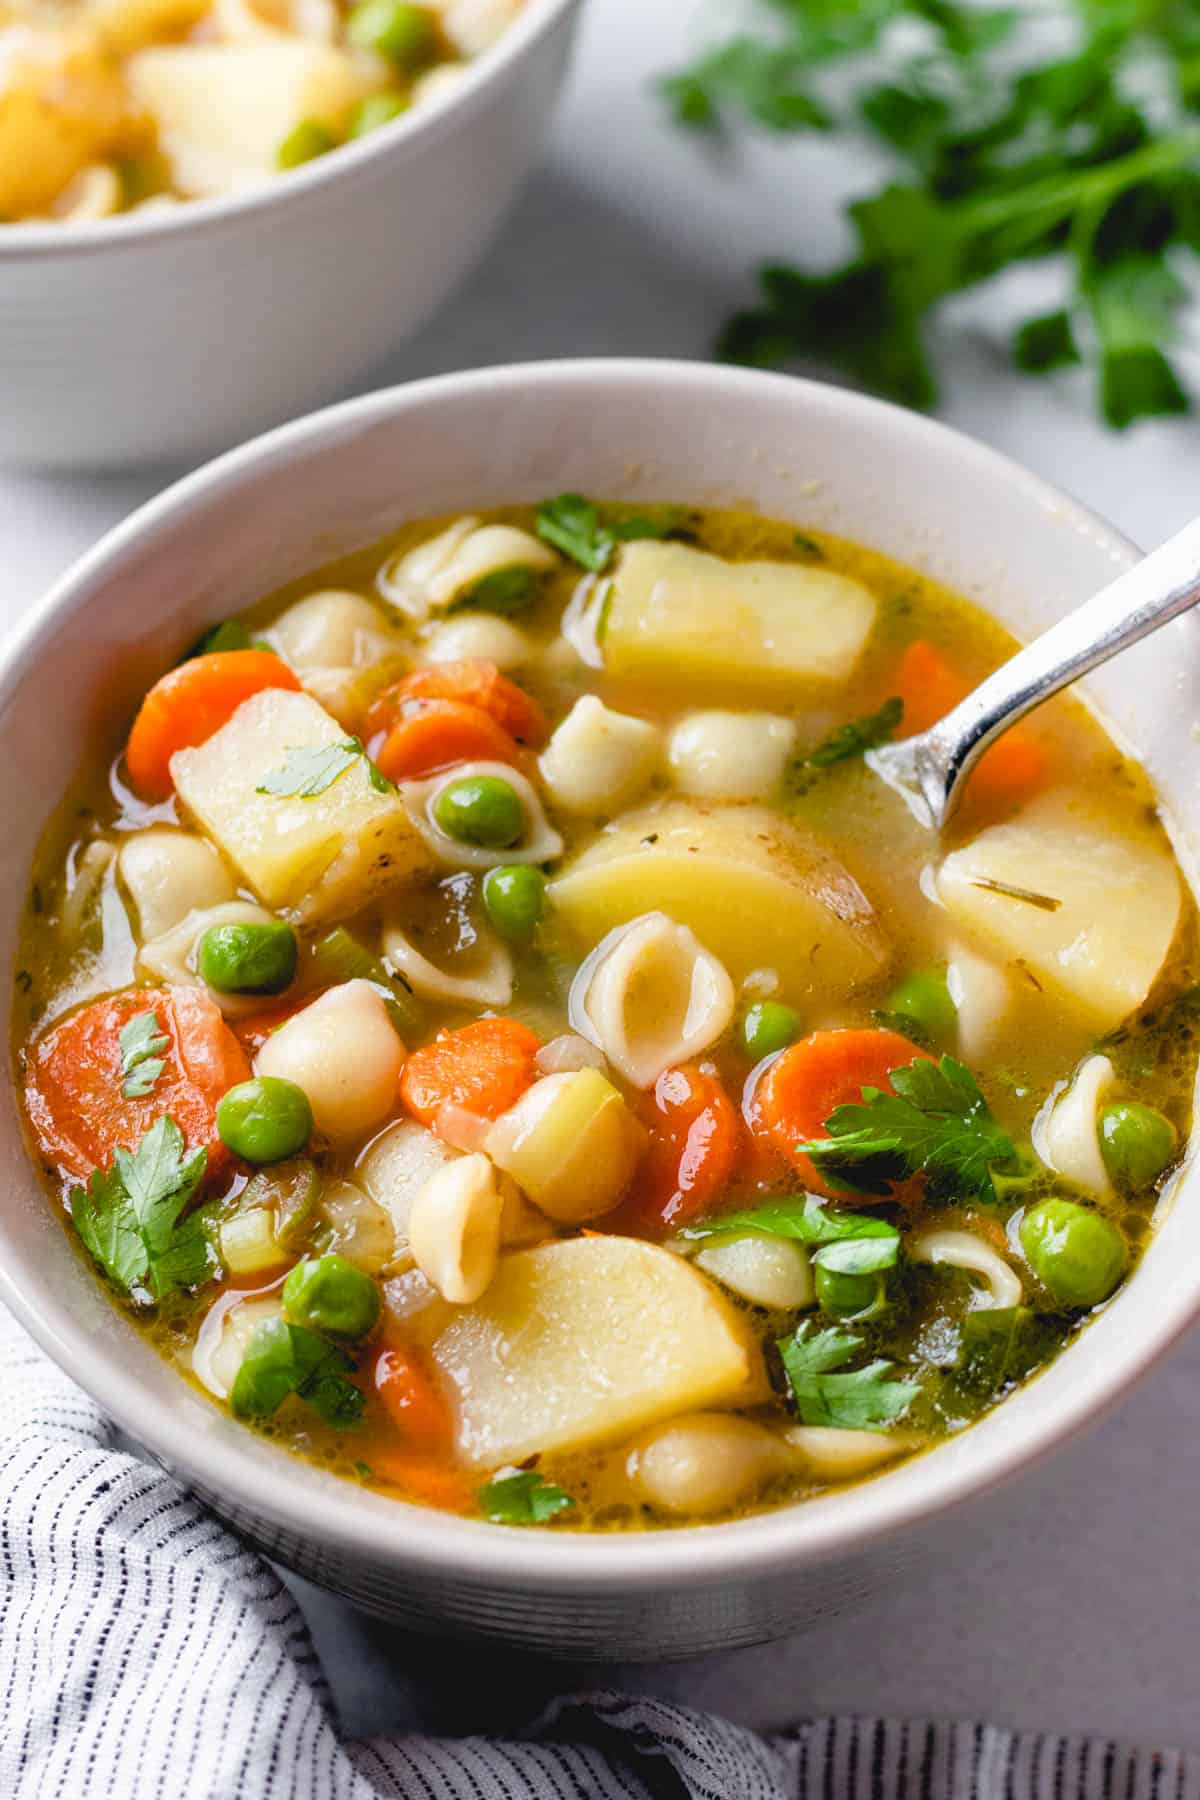 Soup with onions, carrots, potatoes, peas, and pasta in a bowl.